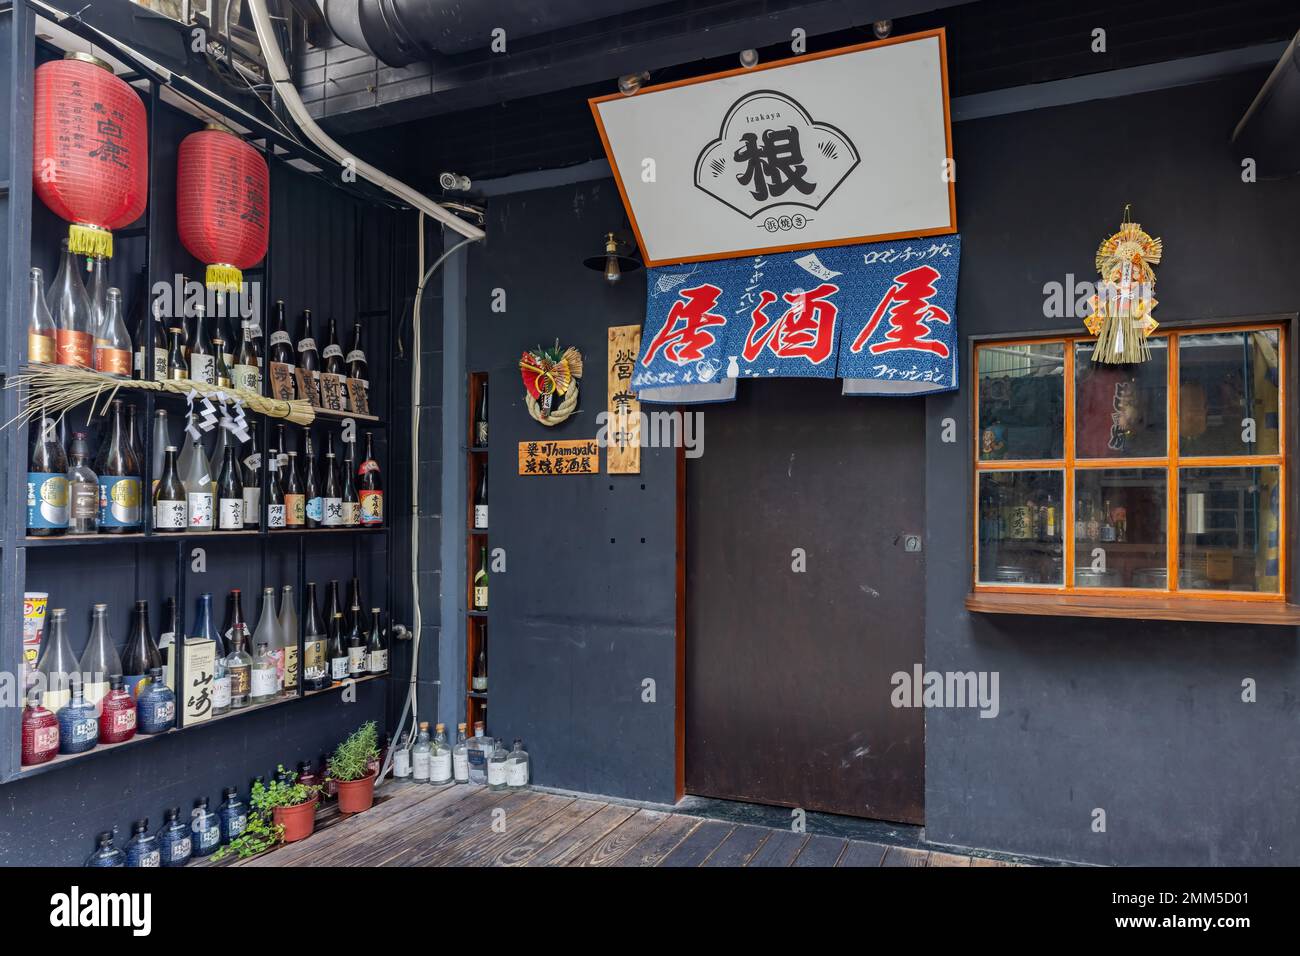 Tainan, JAN 5 2023 - Exterior view of a Japanese restaurant in Shennong Street Stock Photo